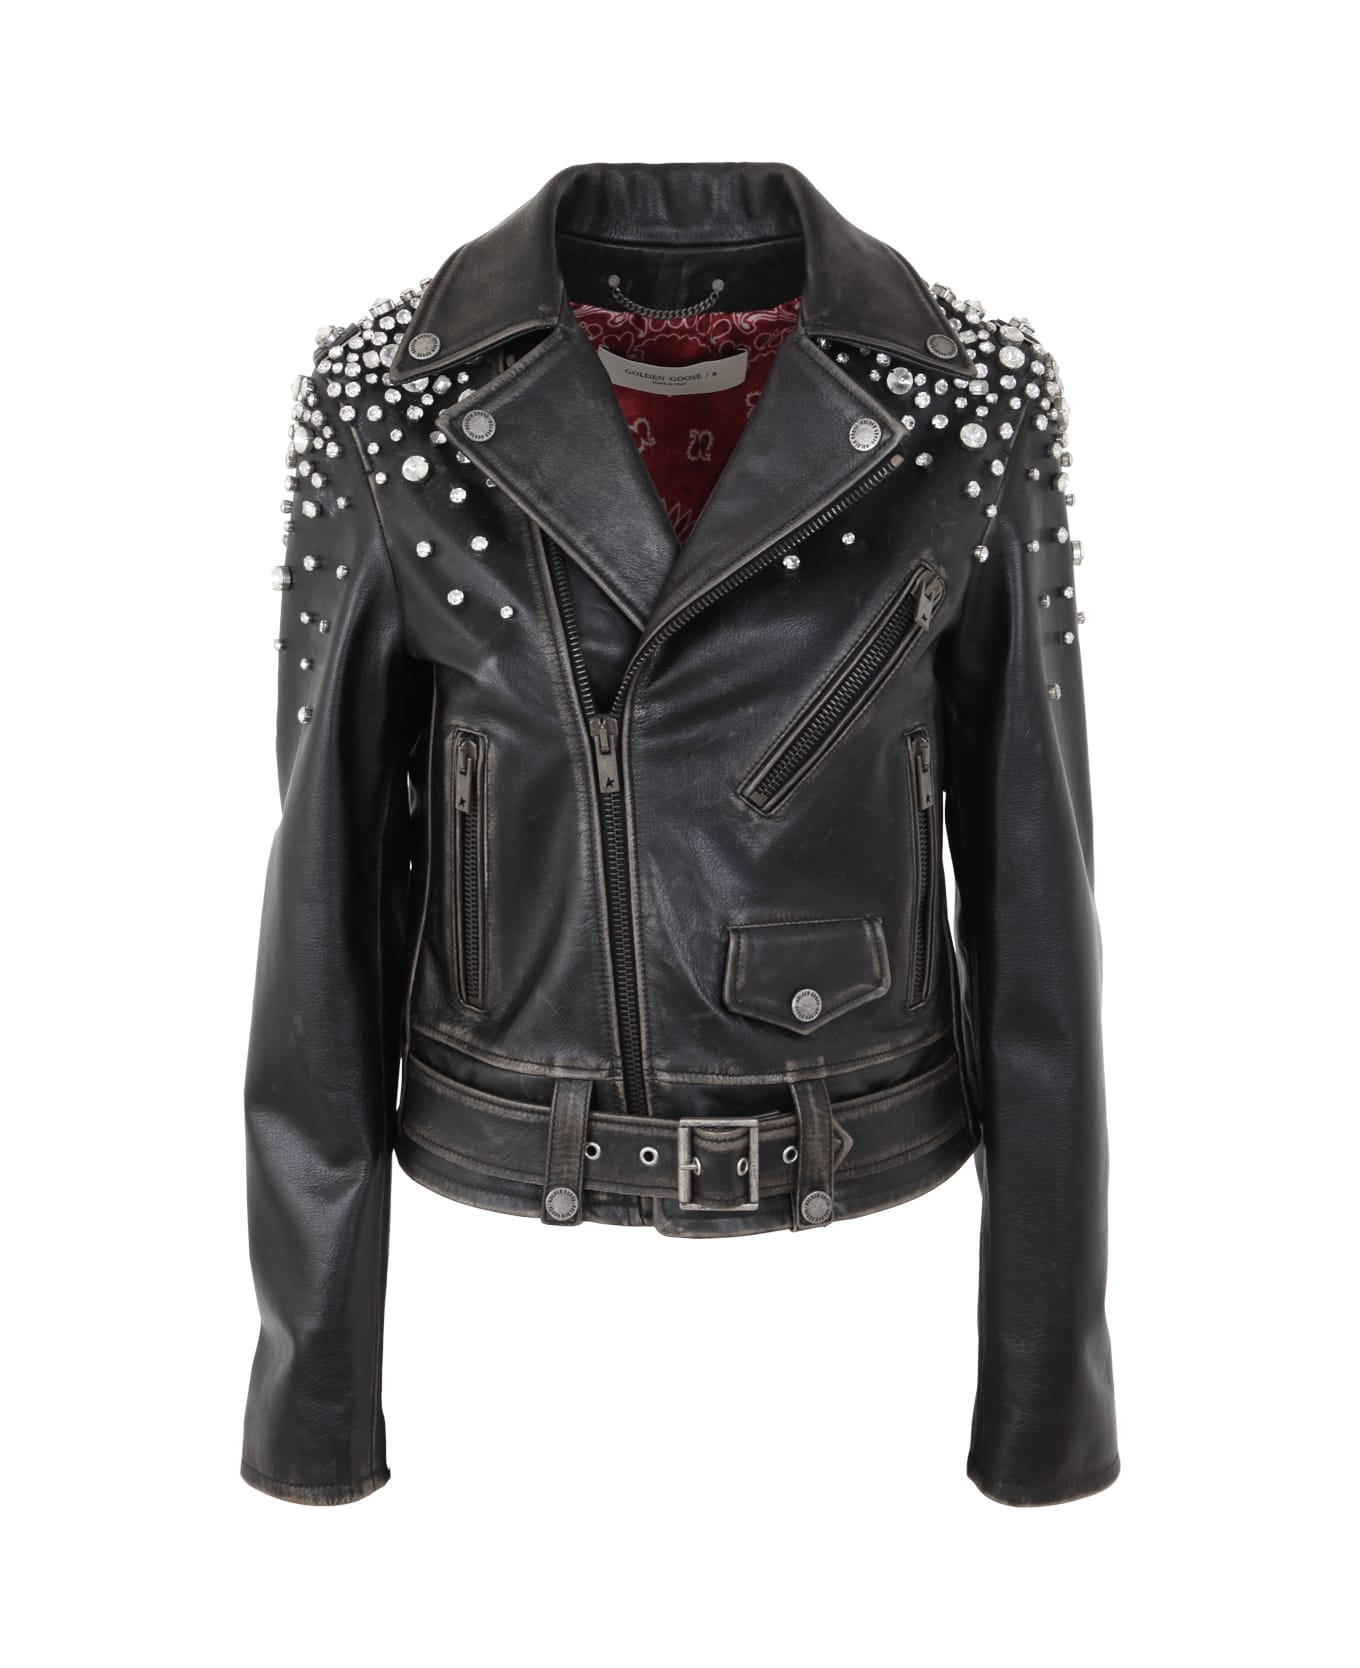 Golden Goose Golden Chiodo Jacket Distressed Bull Leather With Crystals Stones - Black